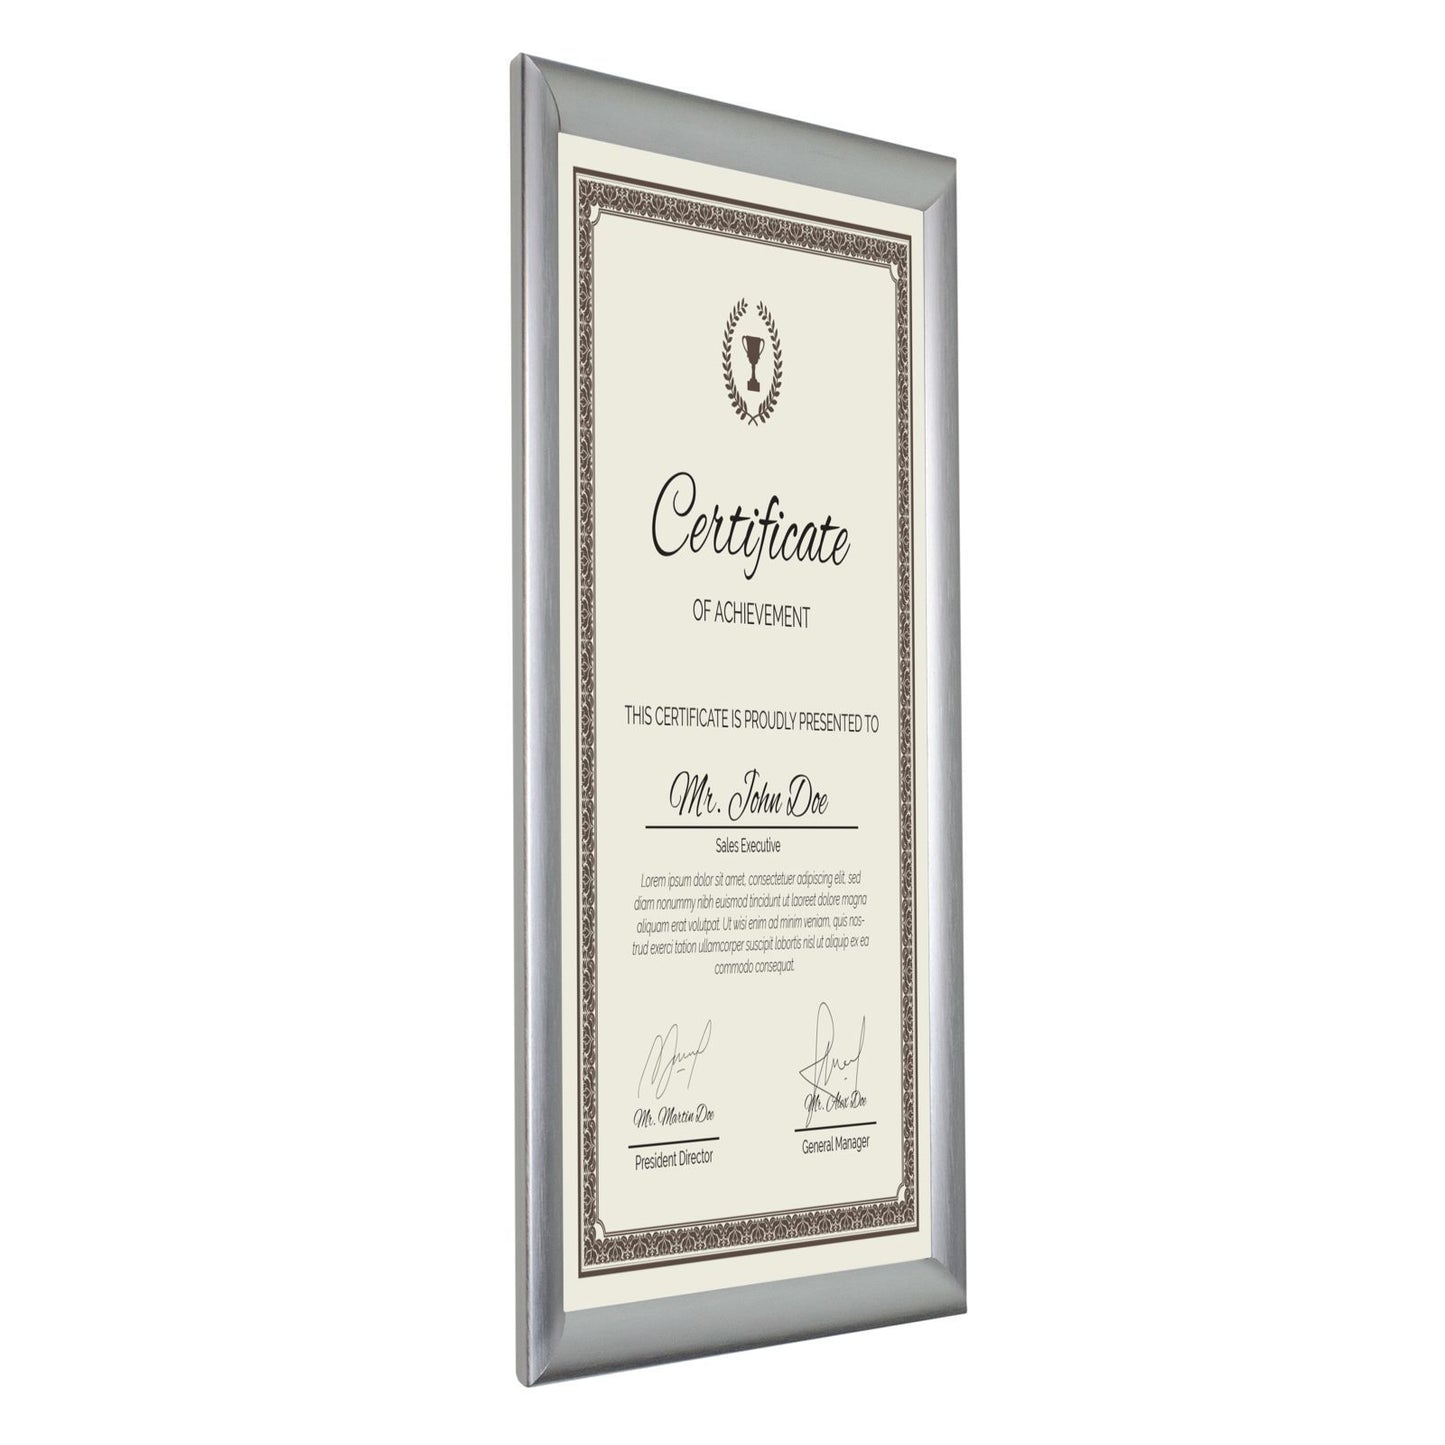 11x17 Brushed Silver SnapeZo® Snap Frame - 1 Inch Profile